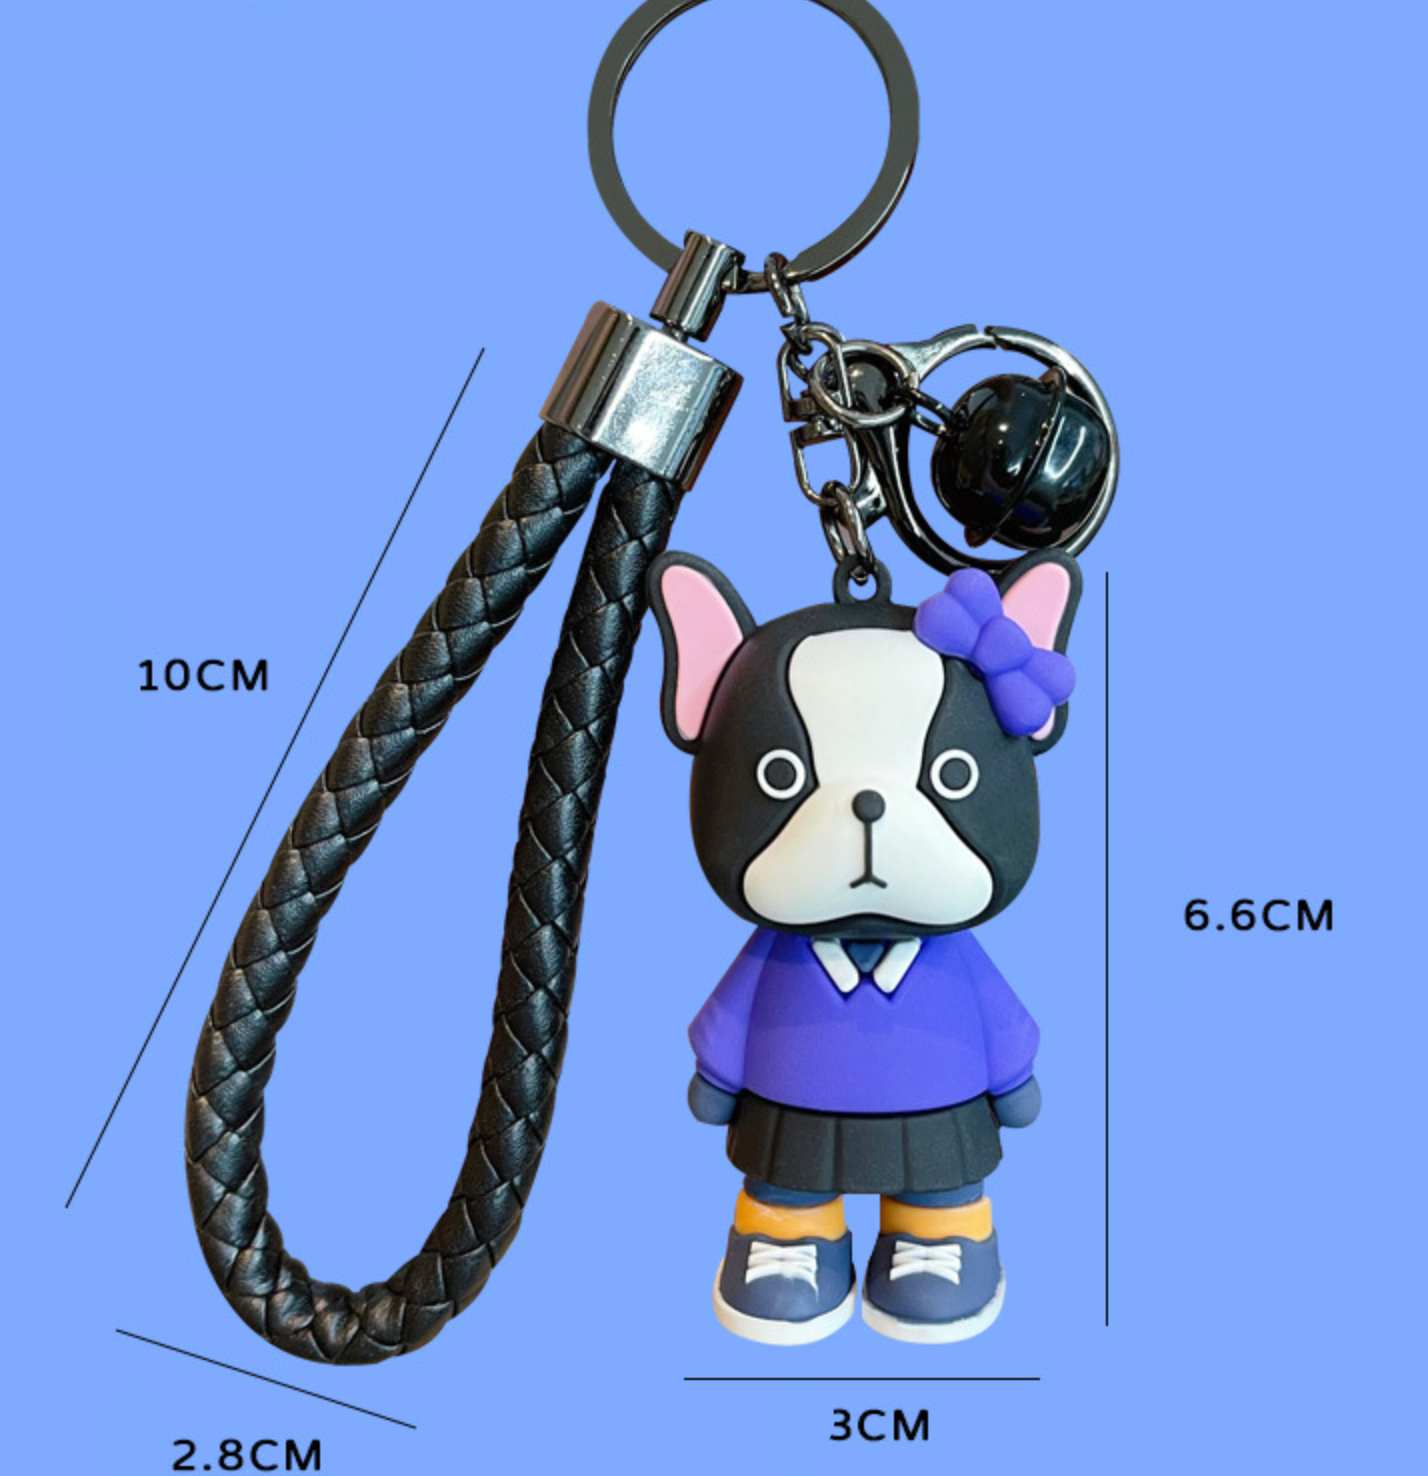 Mr. and Mrs. Boston Terrier keychains - Style's Bug